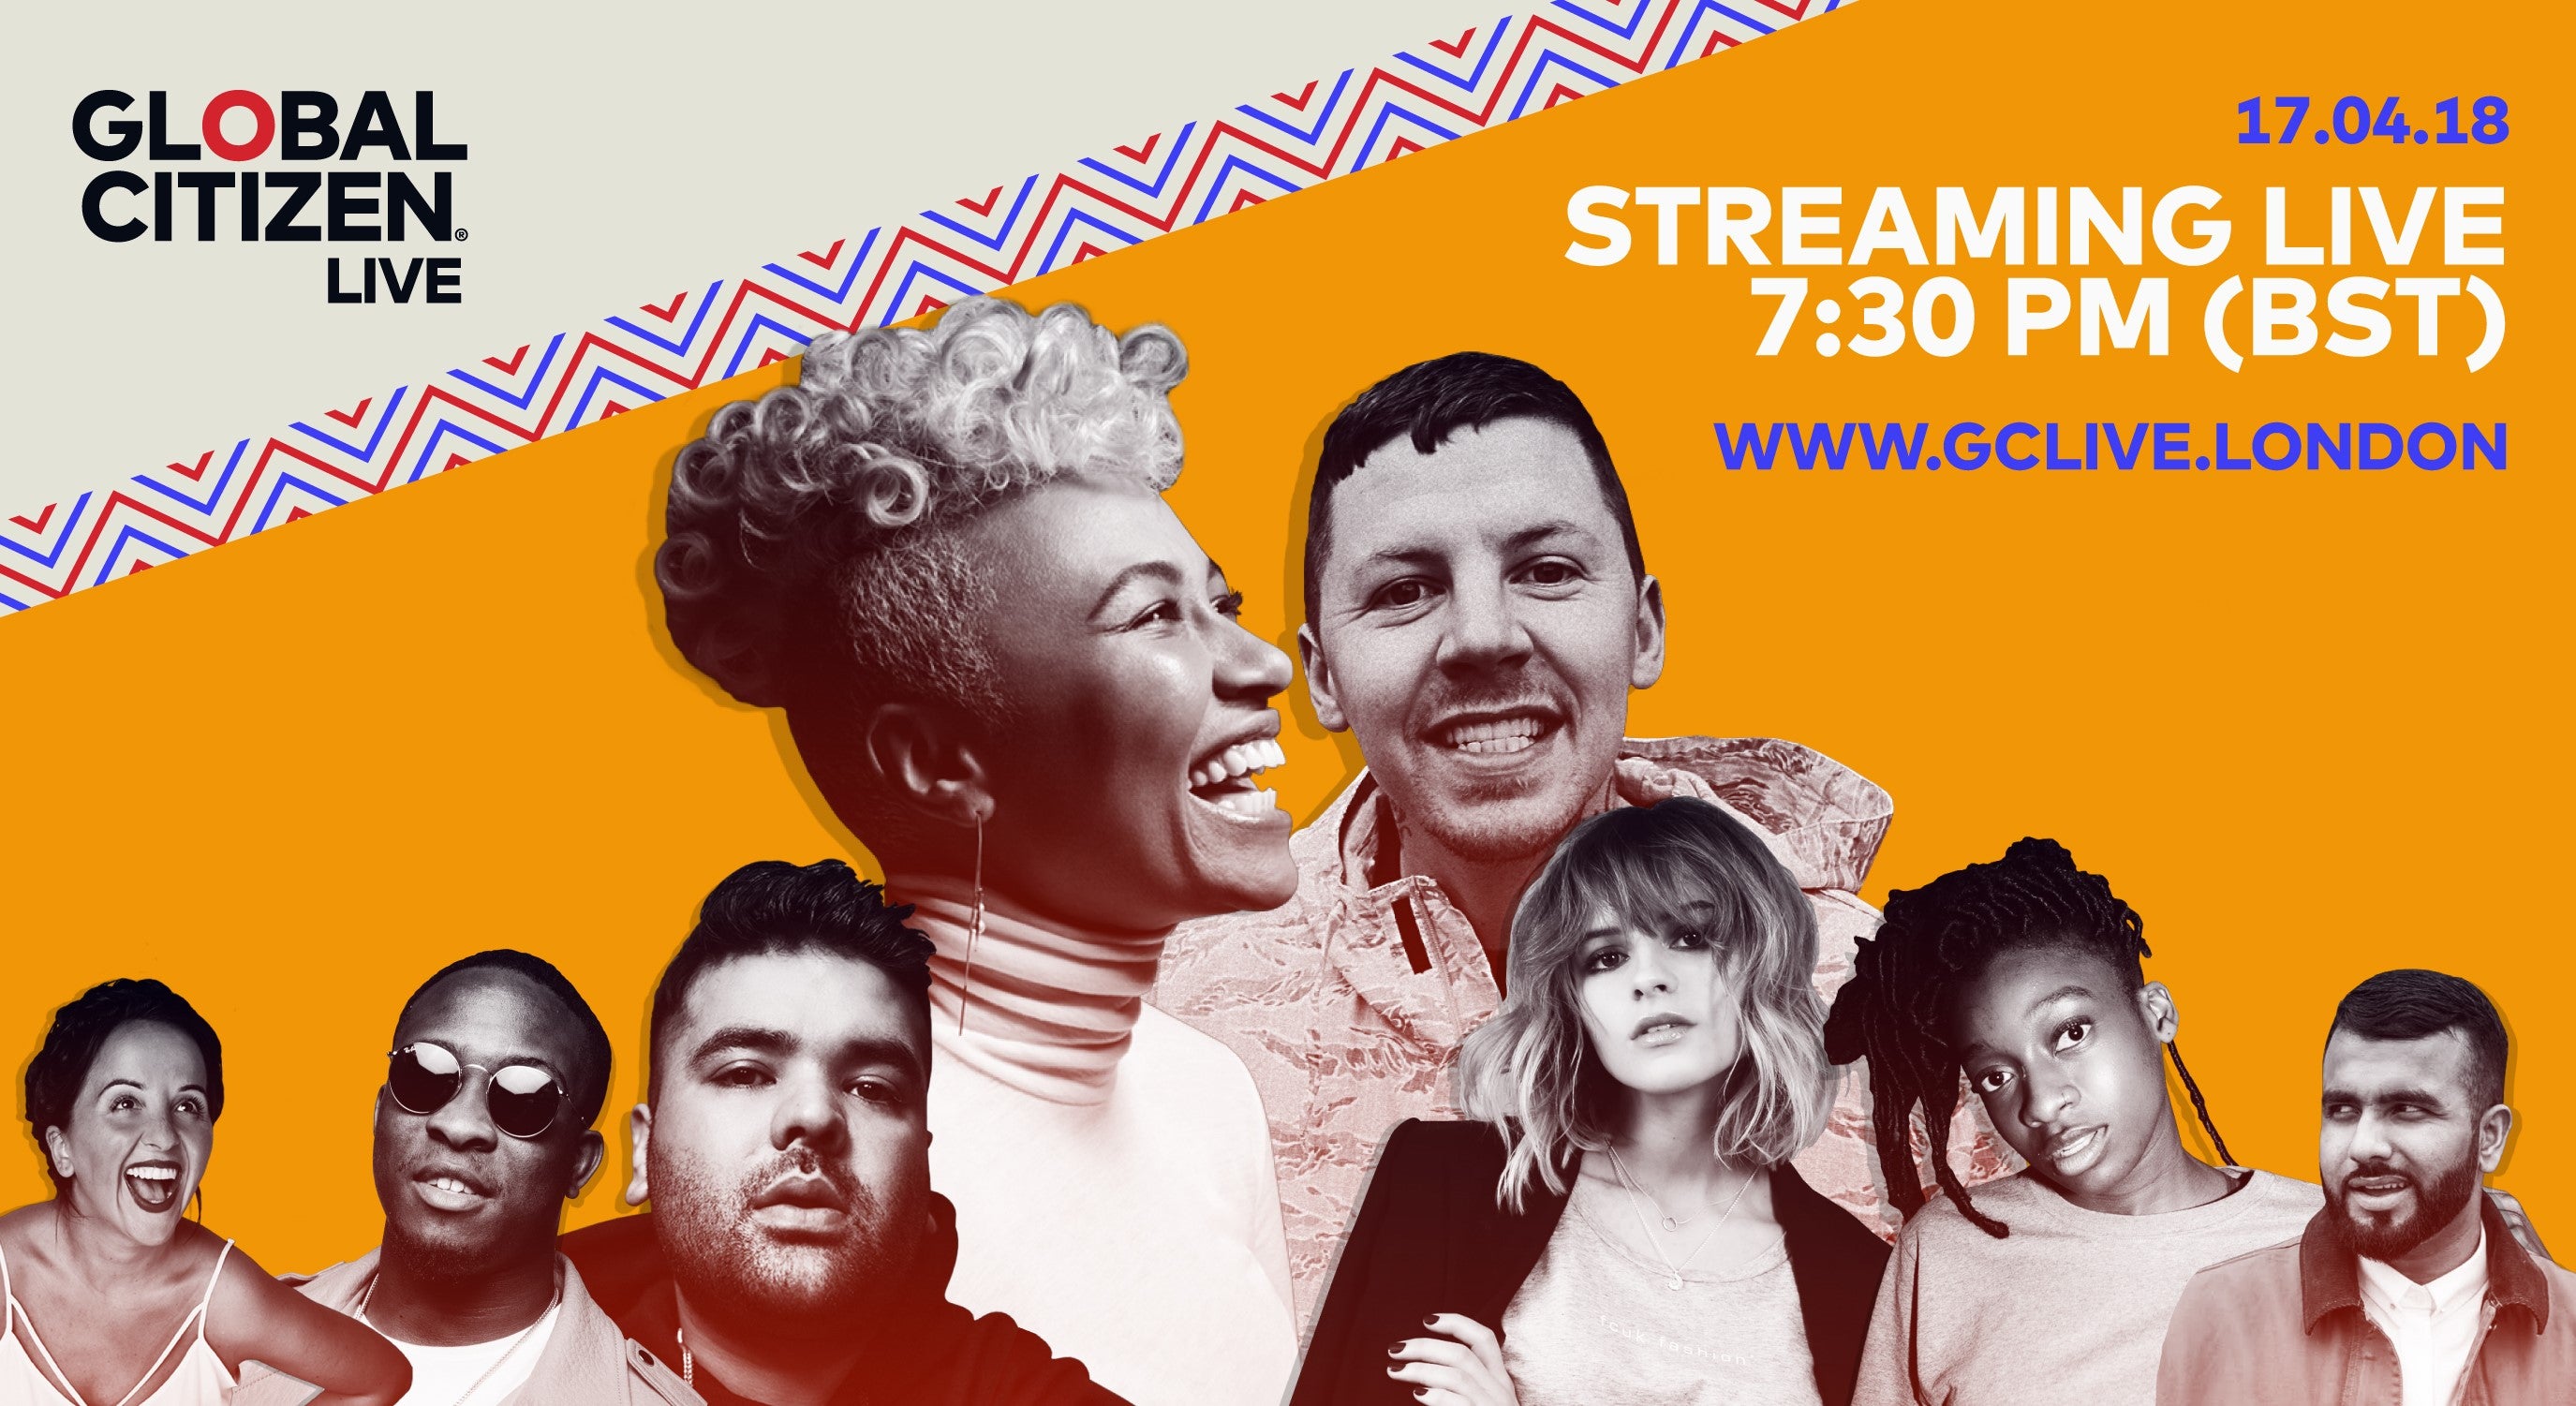 EXCLUSIVE: Watch Emeli Sandé, Professor Green, Naughty Boy and Many More Streamed Live from Global Citizen Live in London